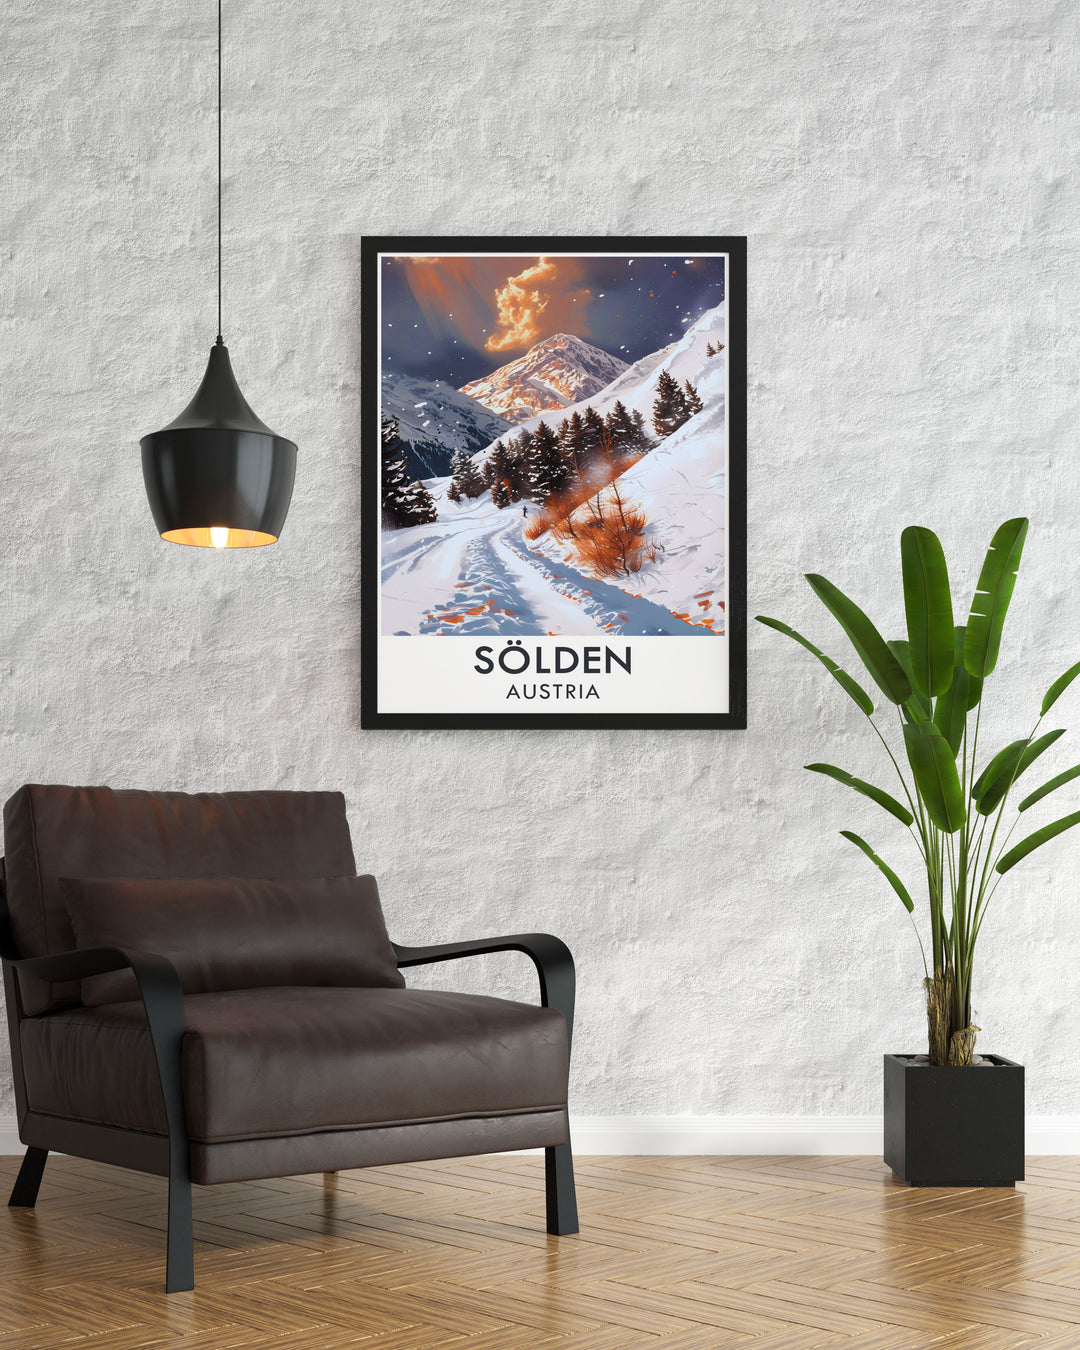 The picturesque Rettenbach Glacier and the dynamic slopes of Solden Ski Resort are beautifully illustrated in this poster, offering a glimpse into the exhilarating experiences and scenic beauty of Austria.